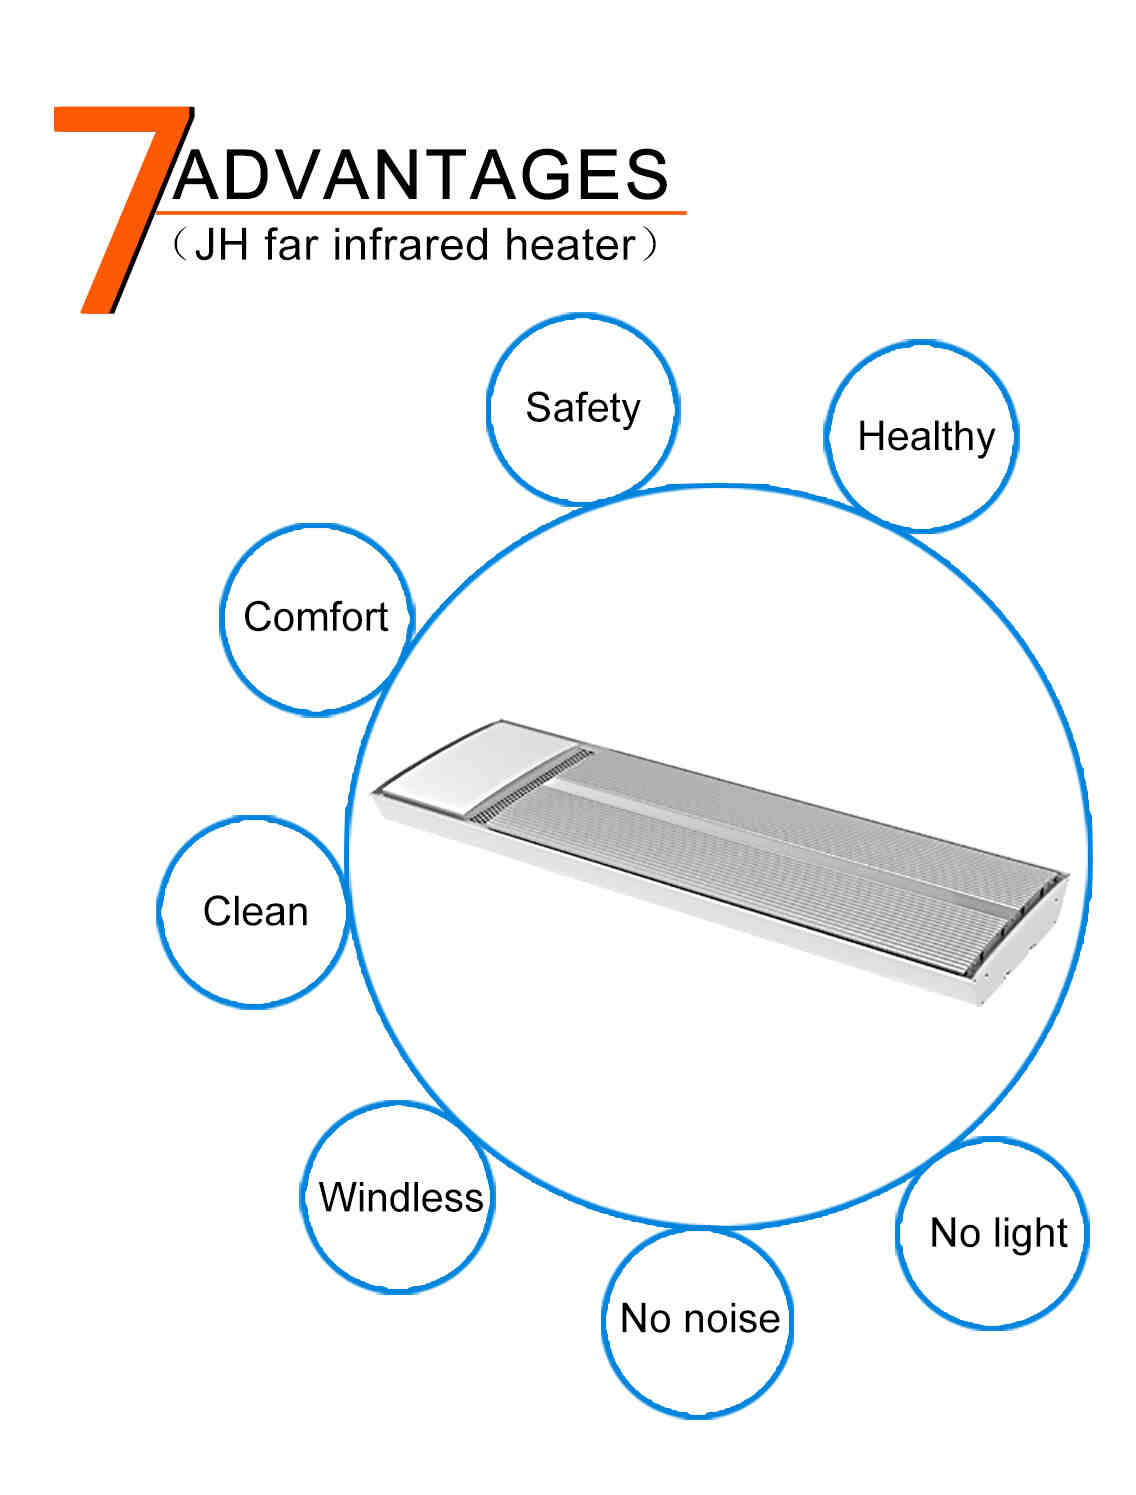 Advantages of JH heater